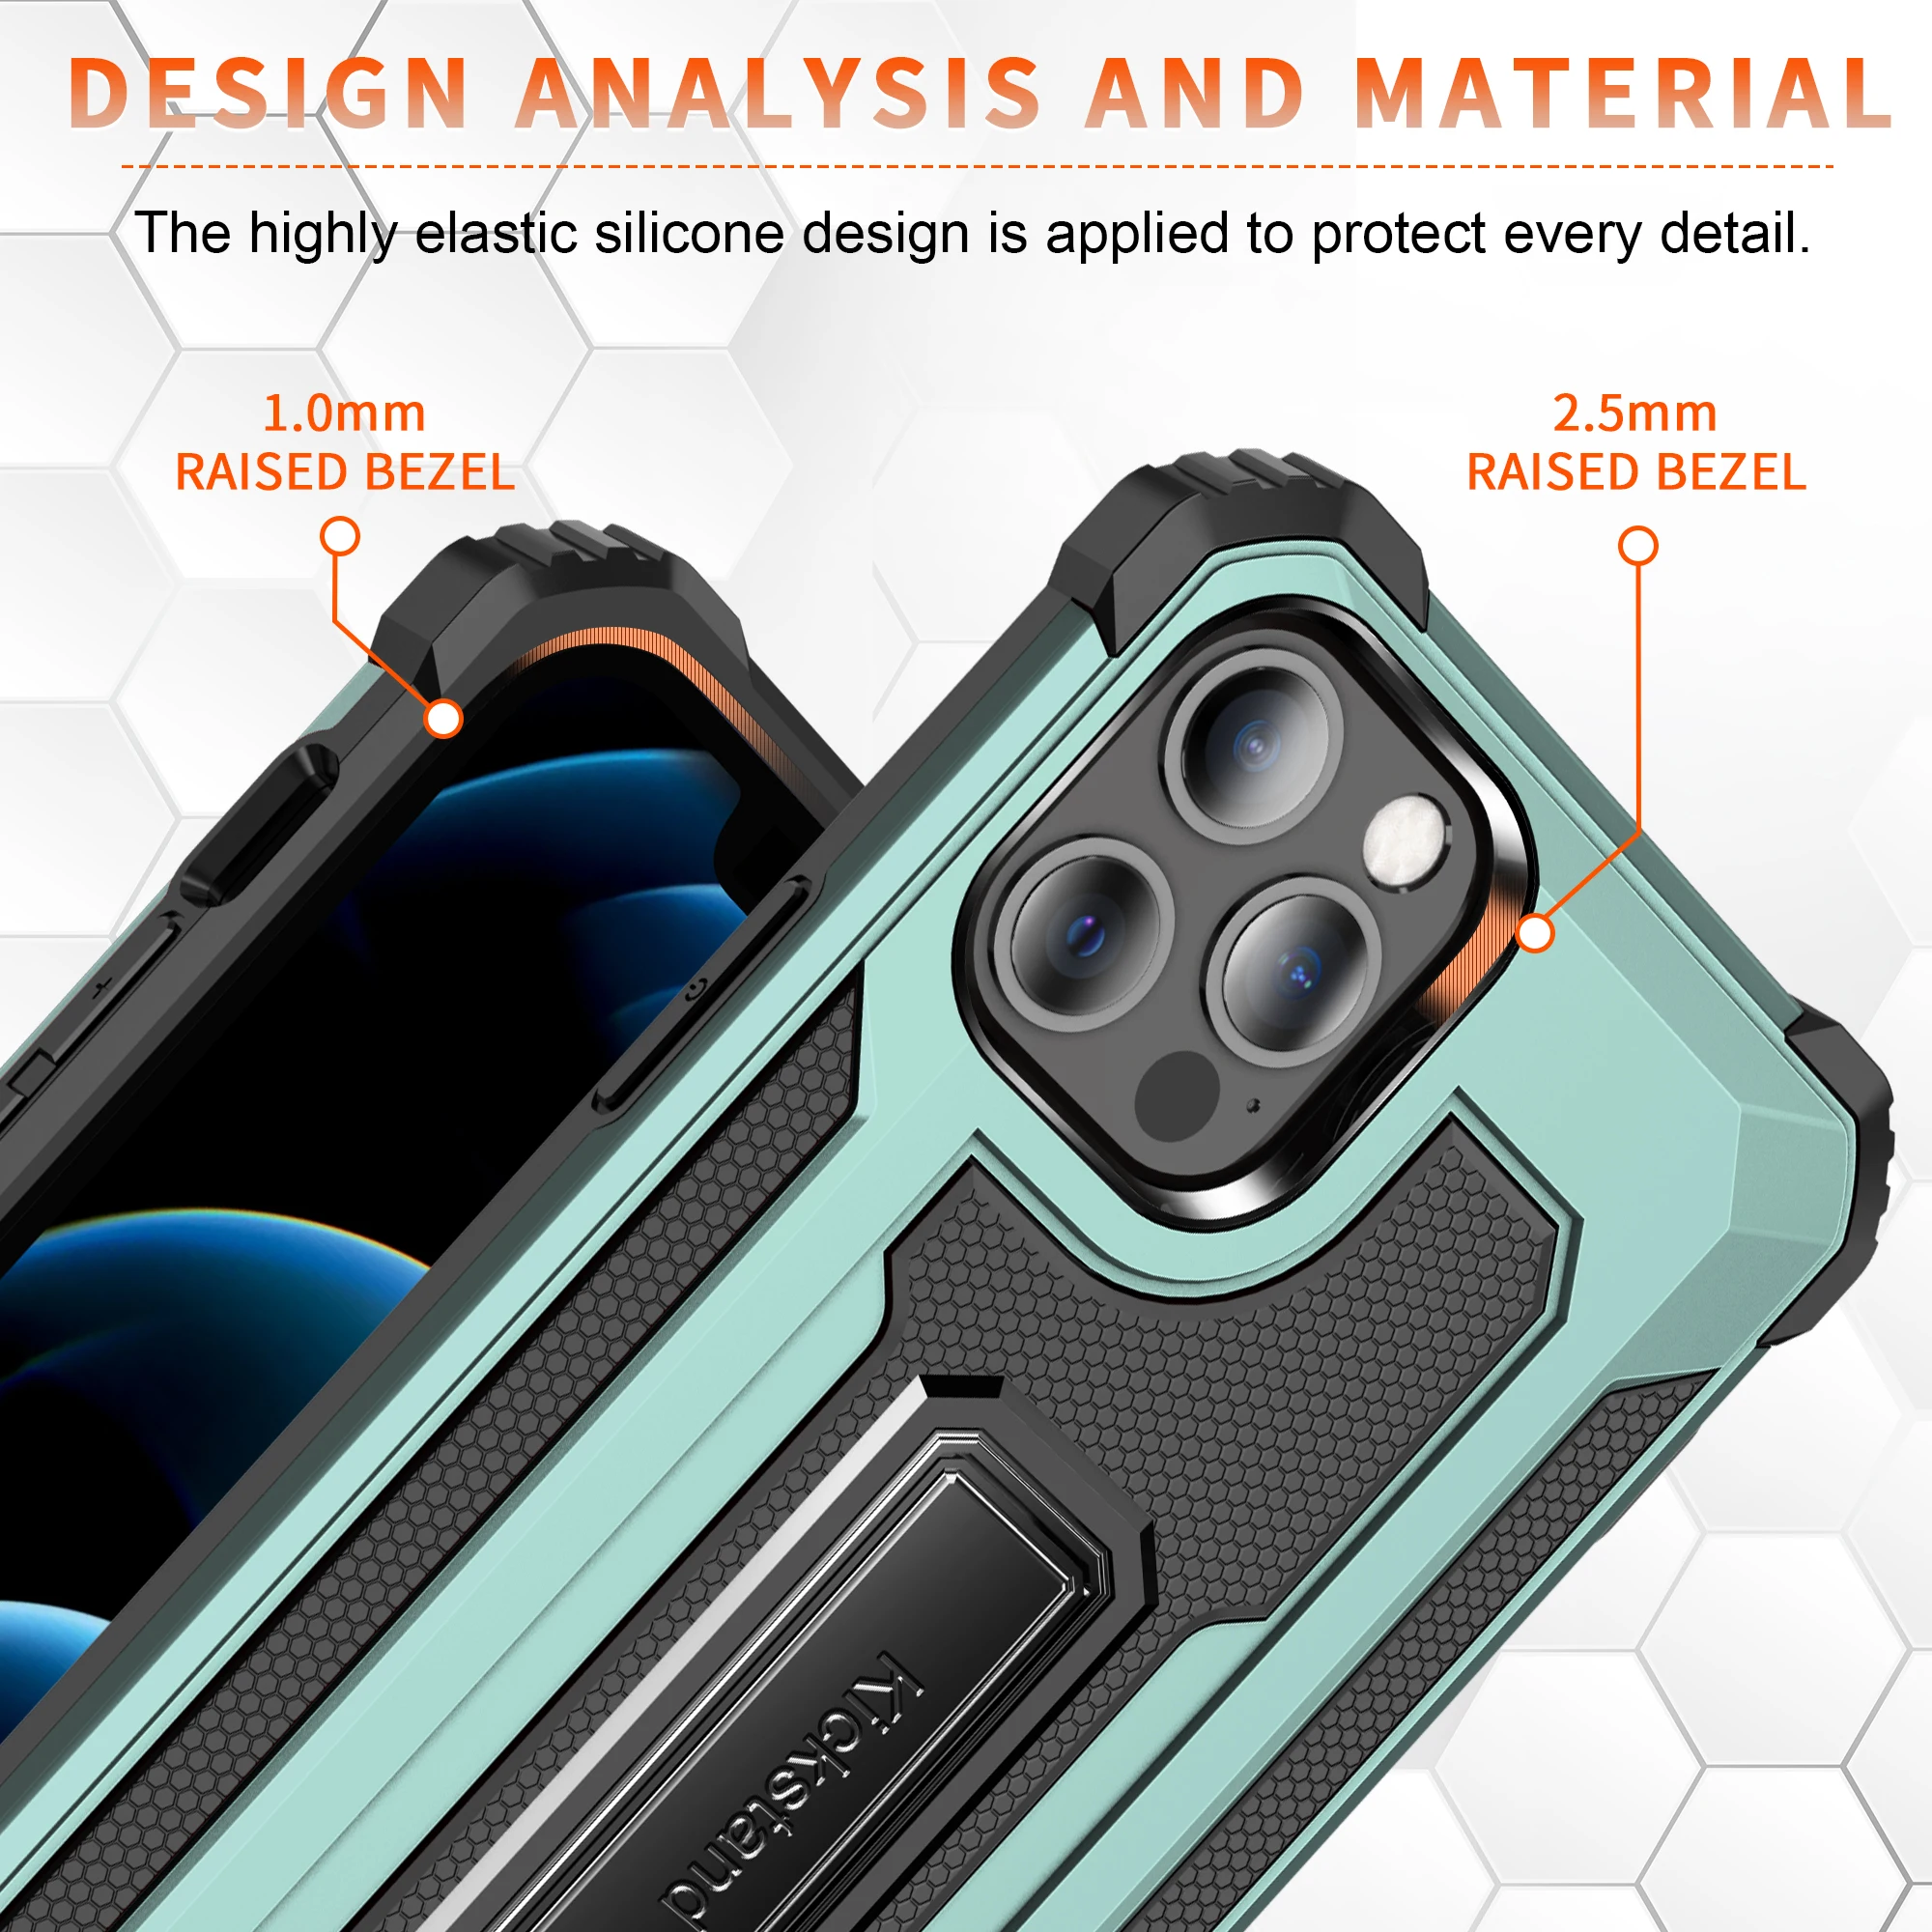 

Phone Case For Samsung Galaxy A50S A30 A20 A20S A50 A70 A30S A10S M10S A10E A01 J2 Core 2020 Armor Rugged Shockproof Stand Cover